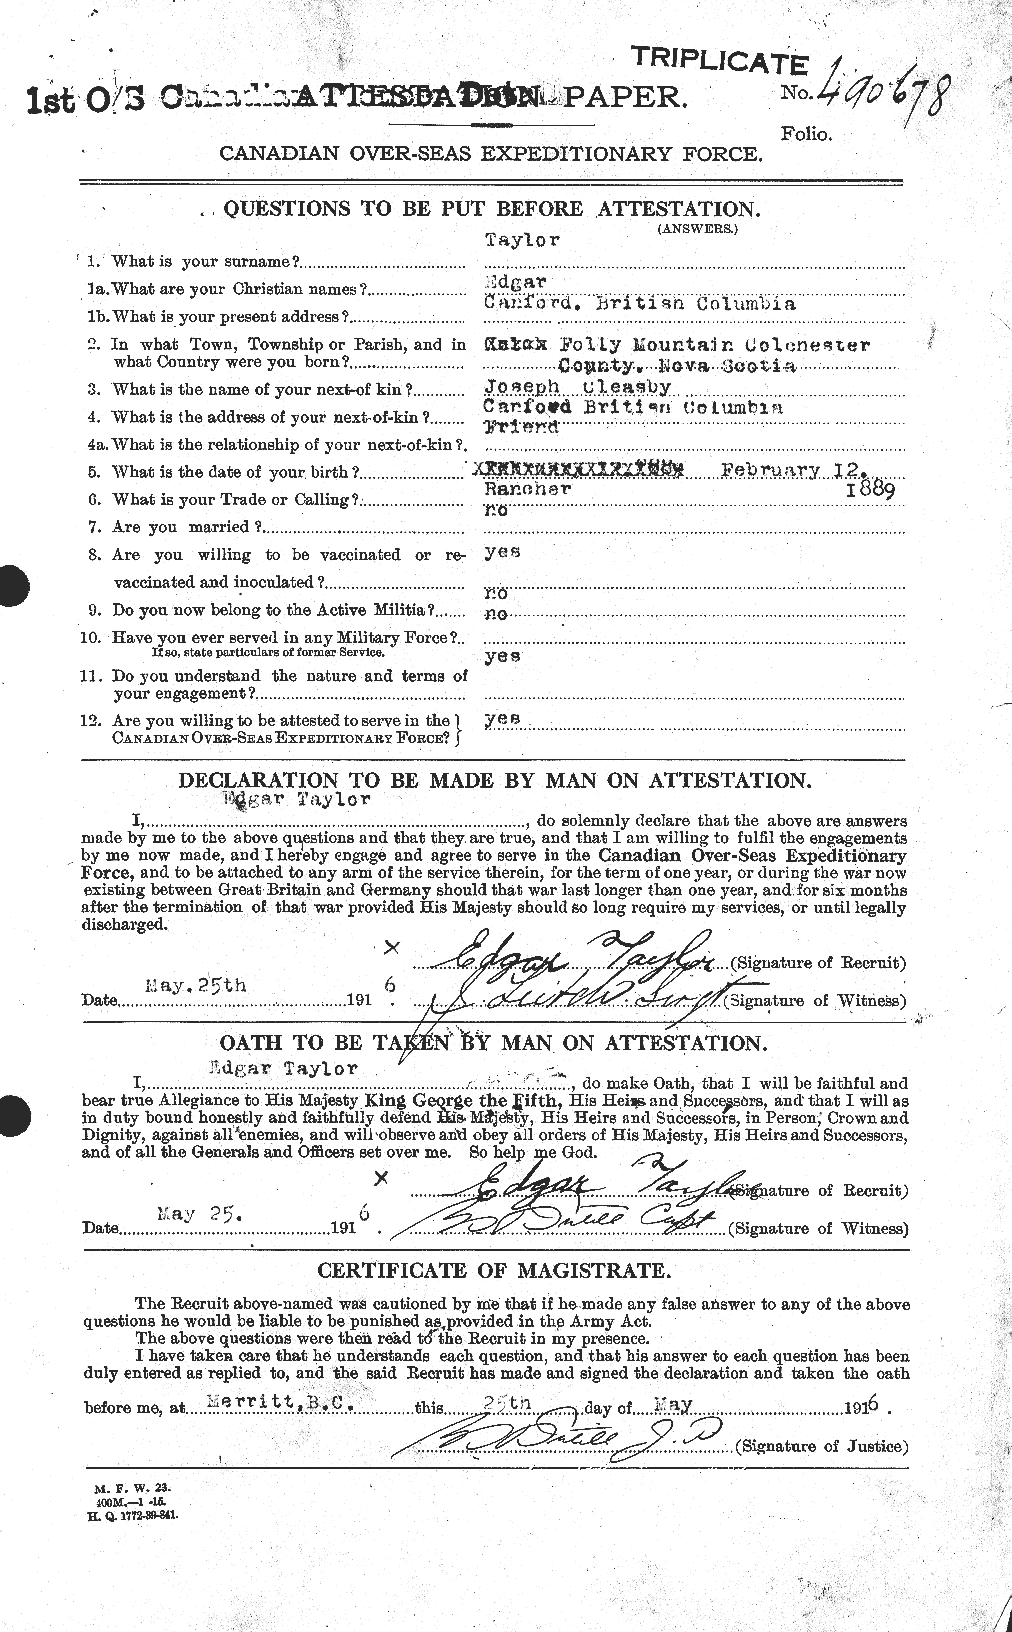 Personnel Records of the First World War - CEF 627271a